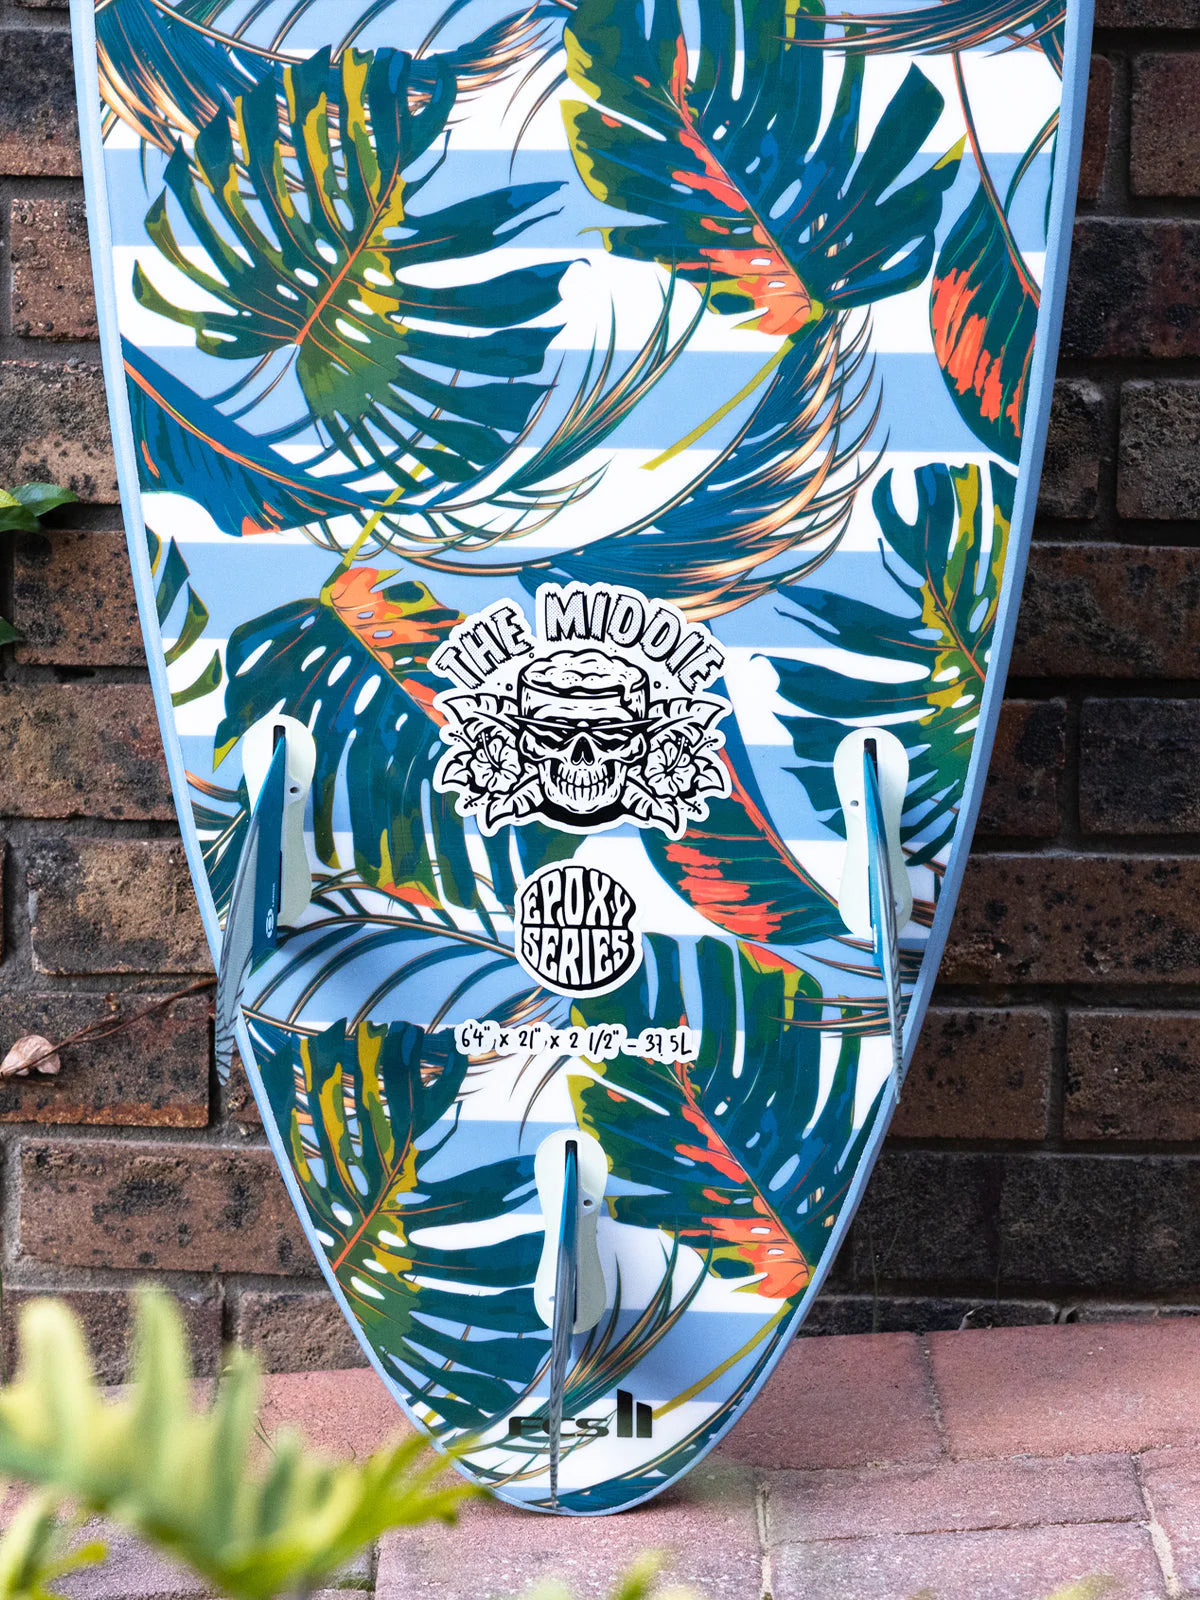 Softech 5'10" The Middie Tropic